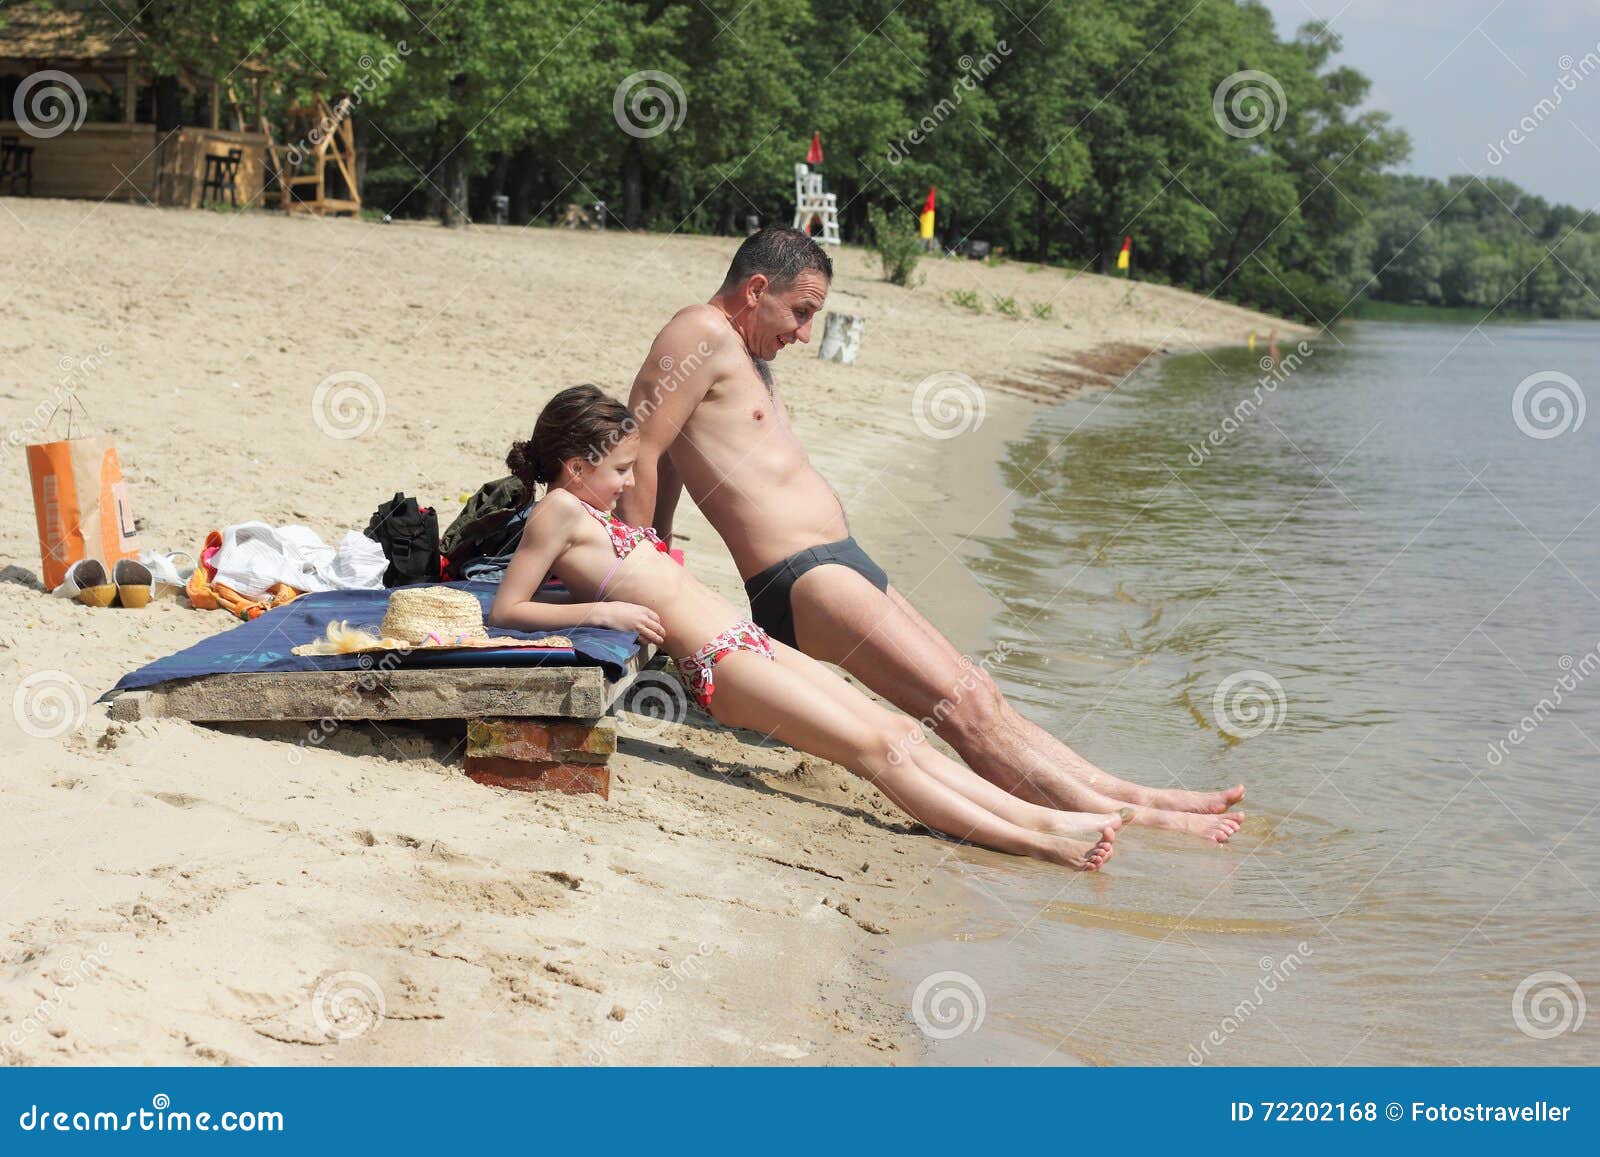 dad daughter nude in beach hot photo